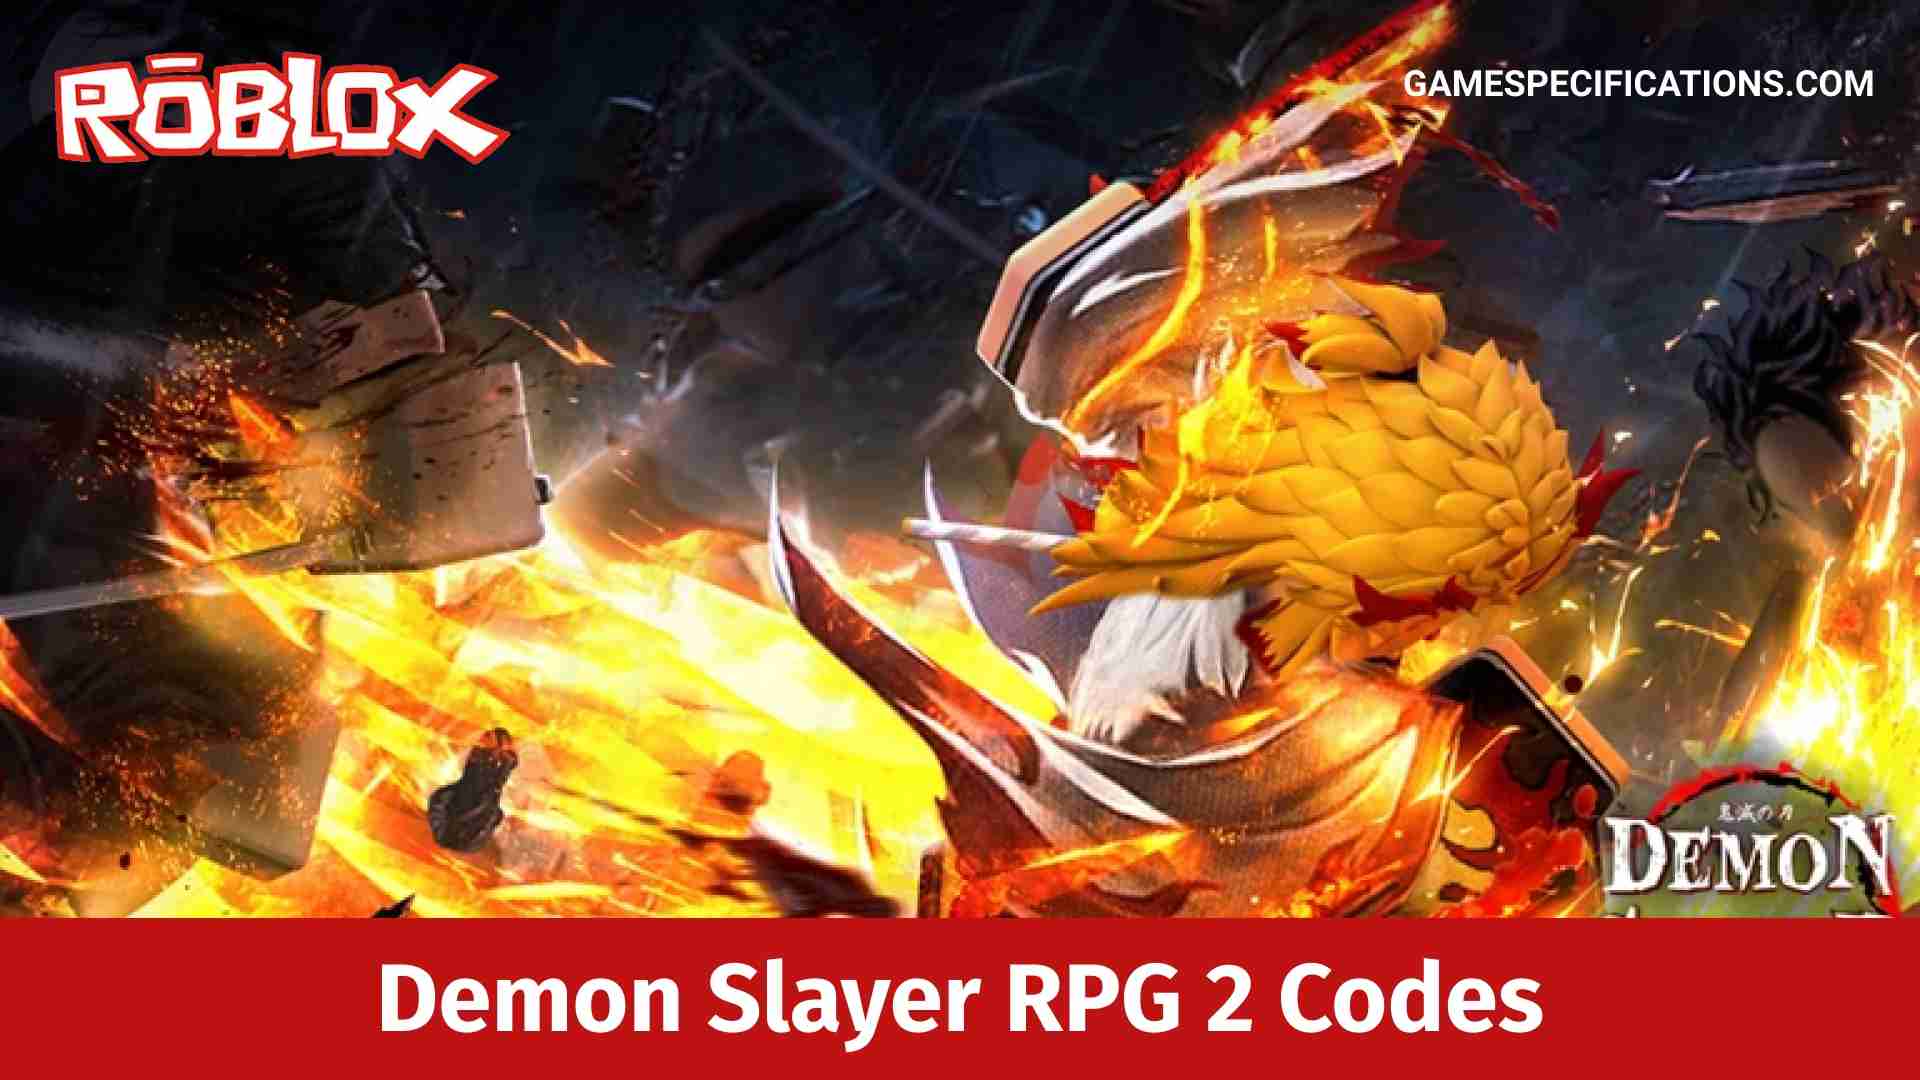 Demon Slayer Rpg 2 Codes October 2021 Game Specifications